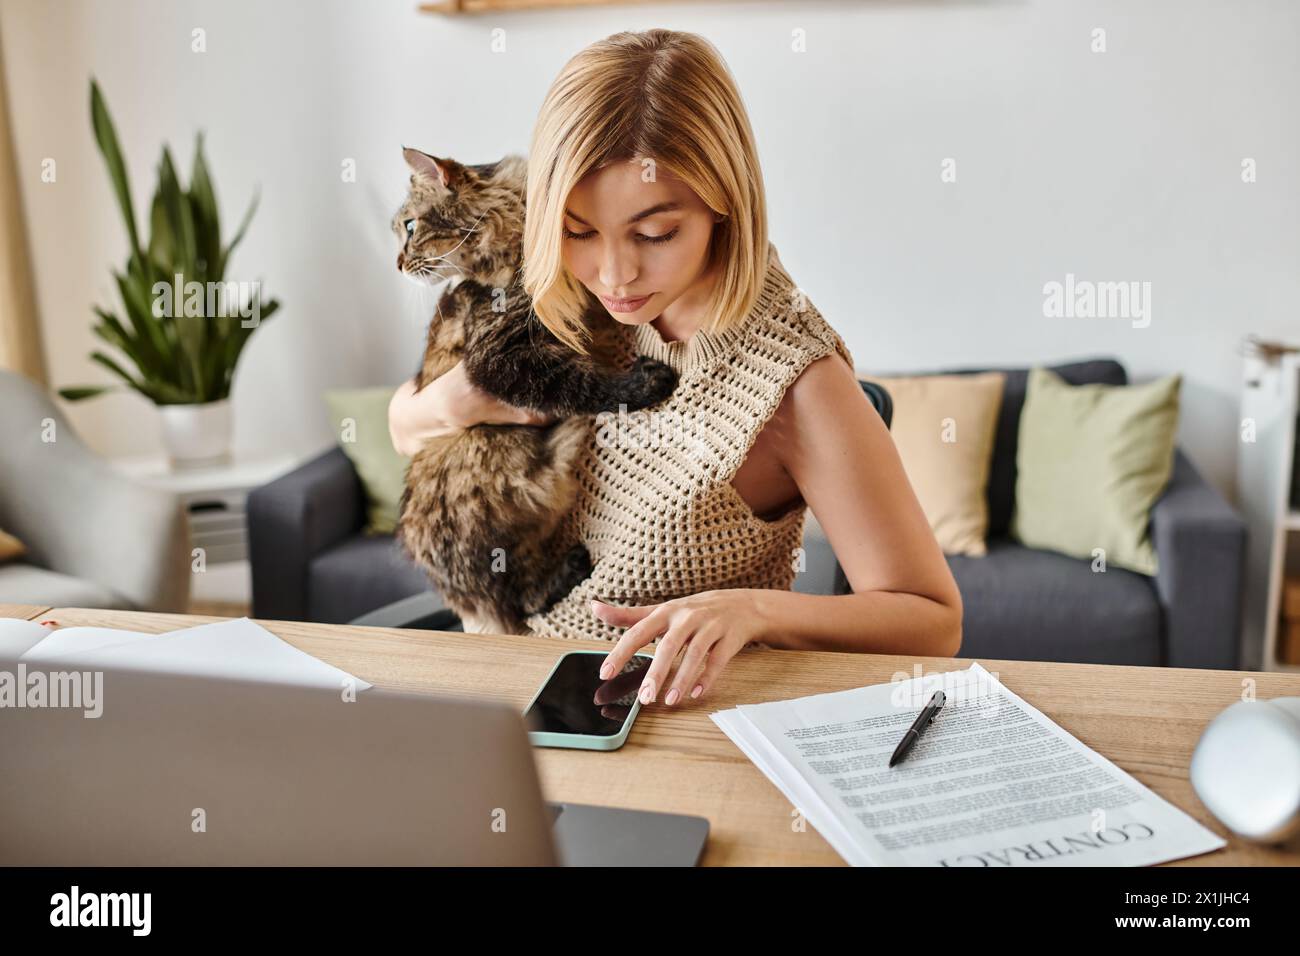 A woman with short hair sits at a table, contently petting her cat perched on her lap, creating a serene atmosphere. Stock Photo